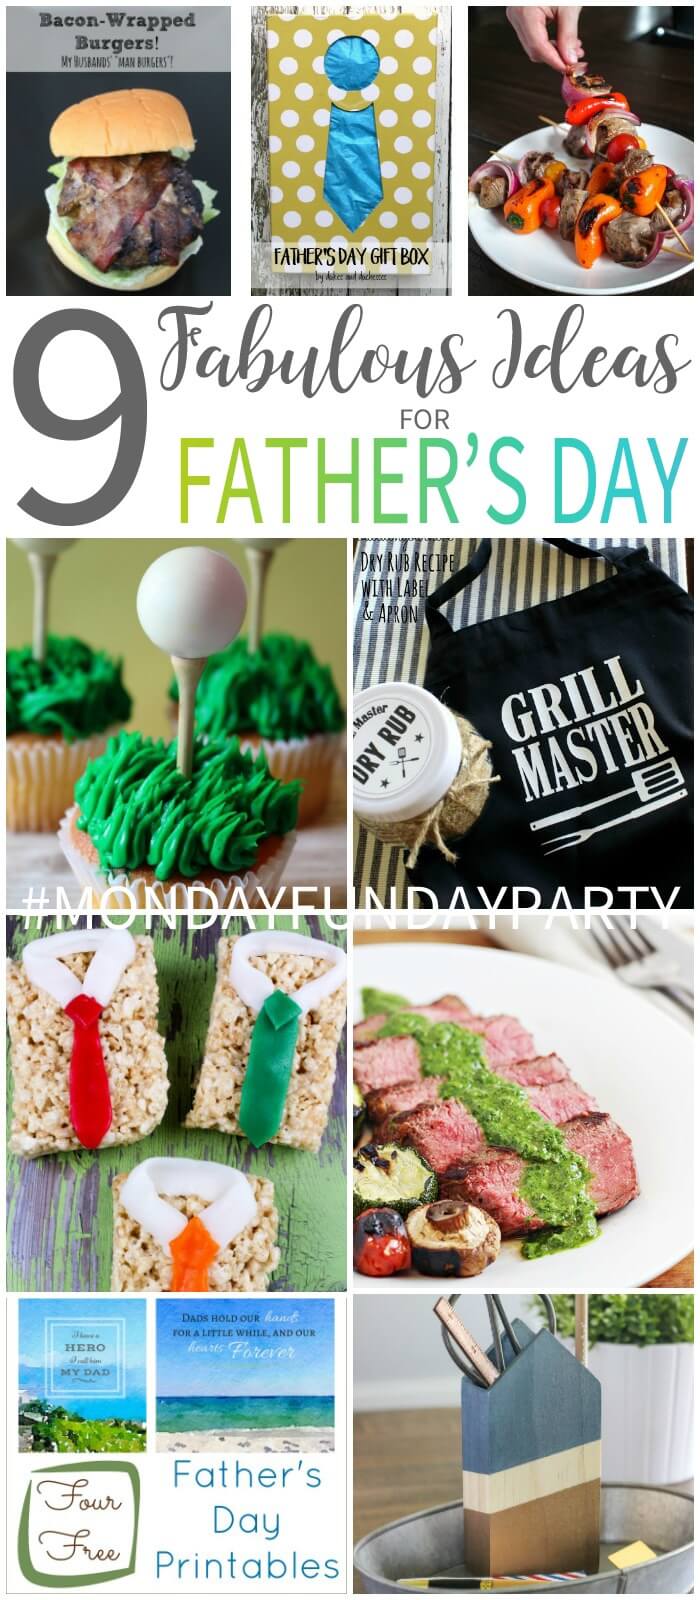 Father's Day Ideas from steaks, to gifts and gift wrap to sweet treats!